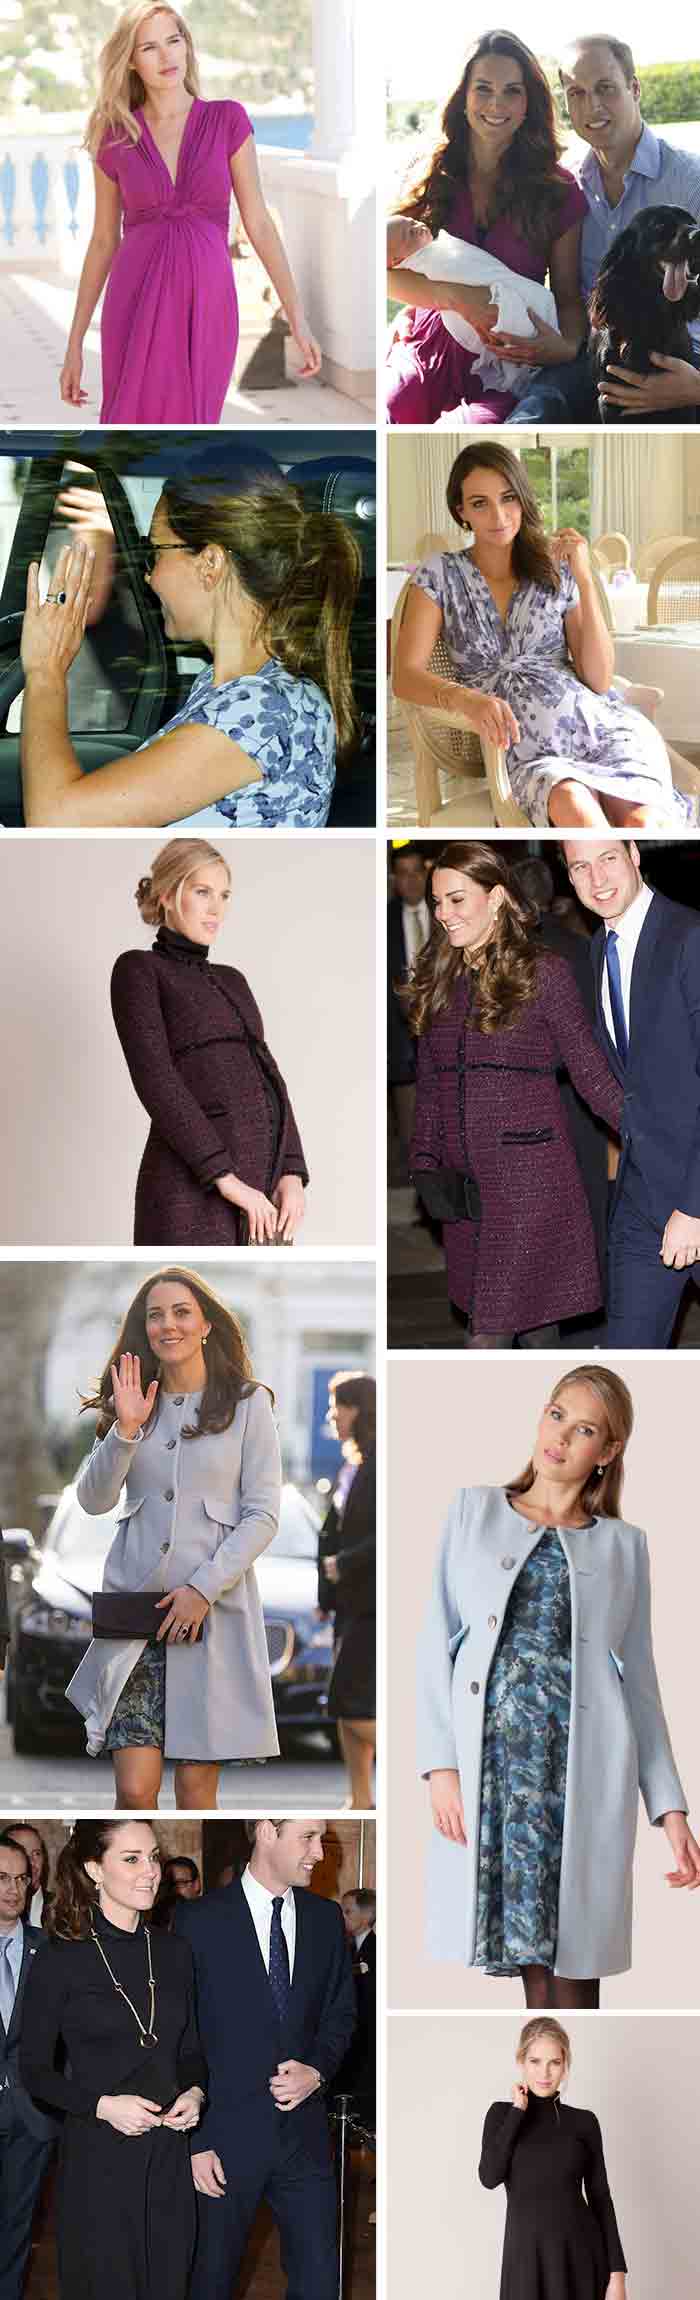 The Duchess of Cambridge wears Seraphine maternity clothes